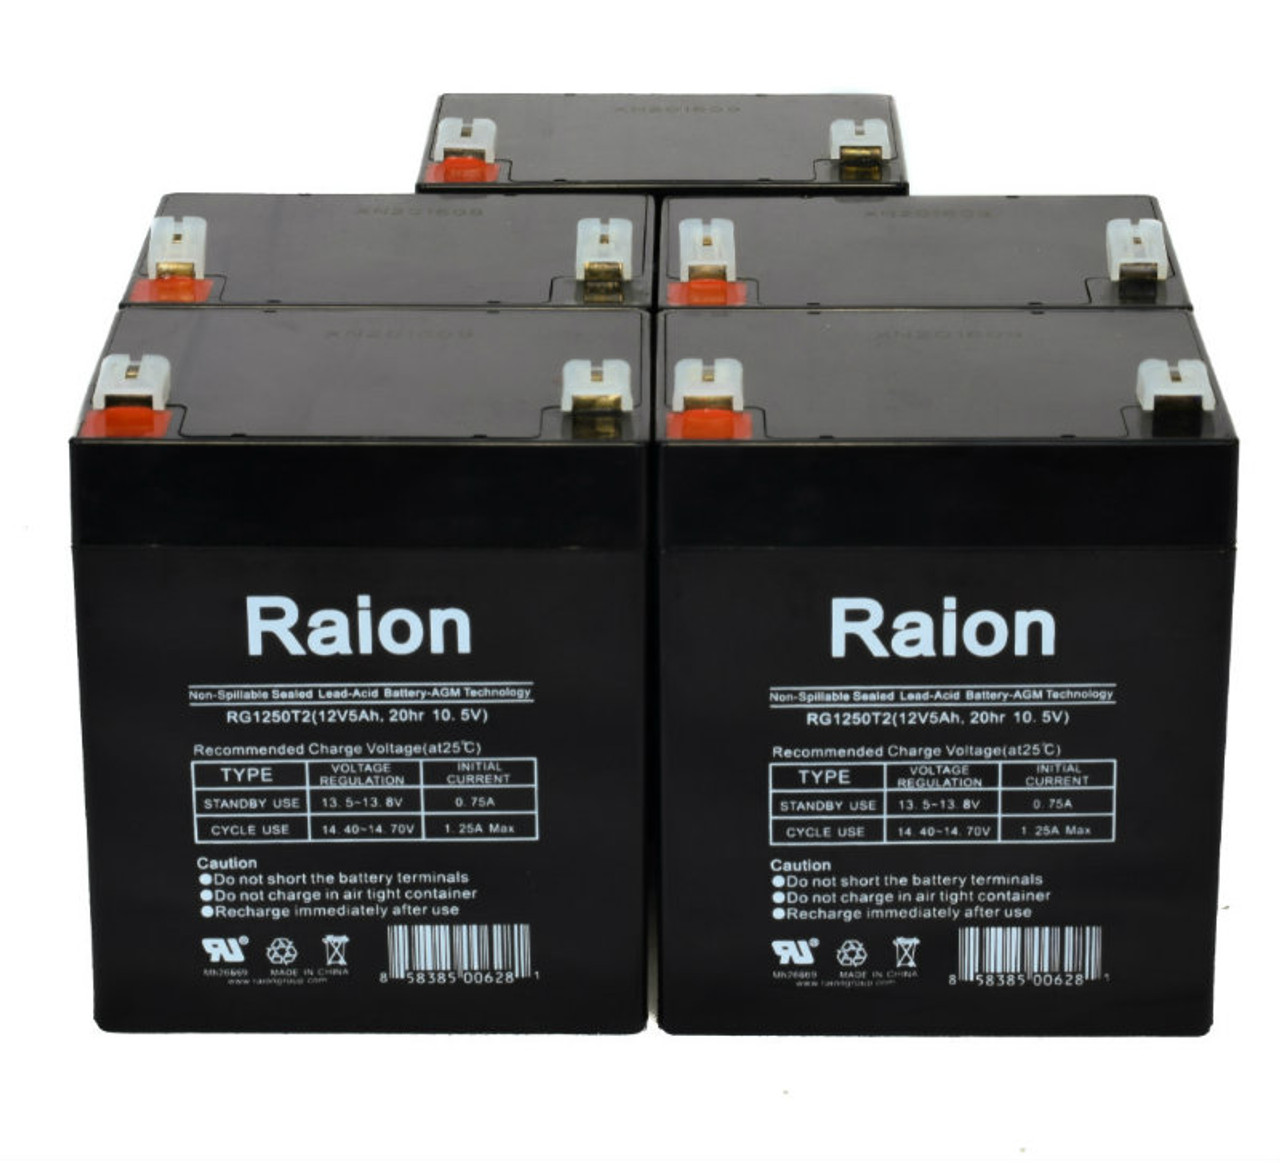 Raion Power RG1250T1 Replacement Fire Alarm Control Panel Battery for Napco Alarms MA1016E - 8 Pack